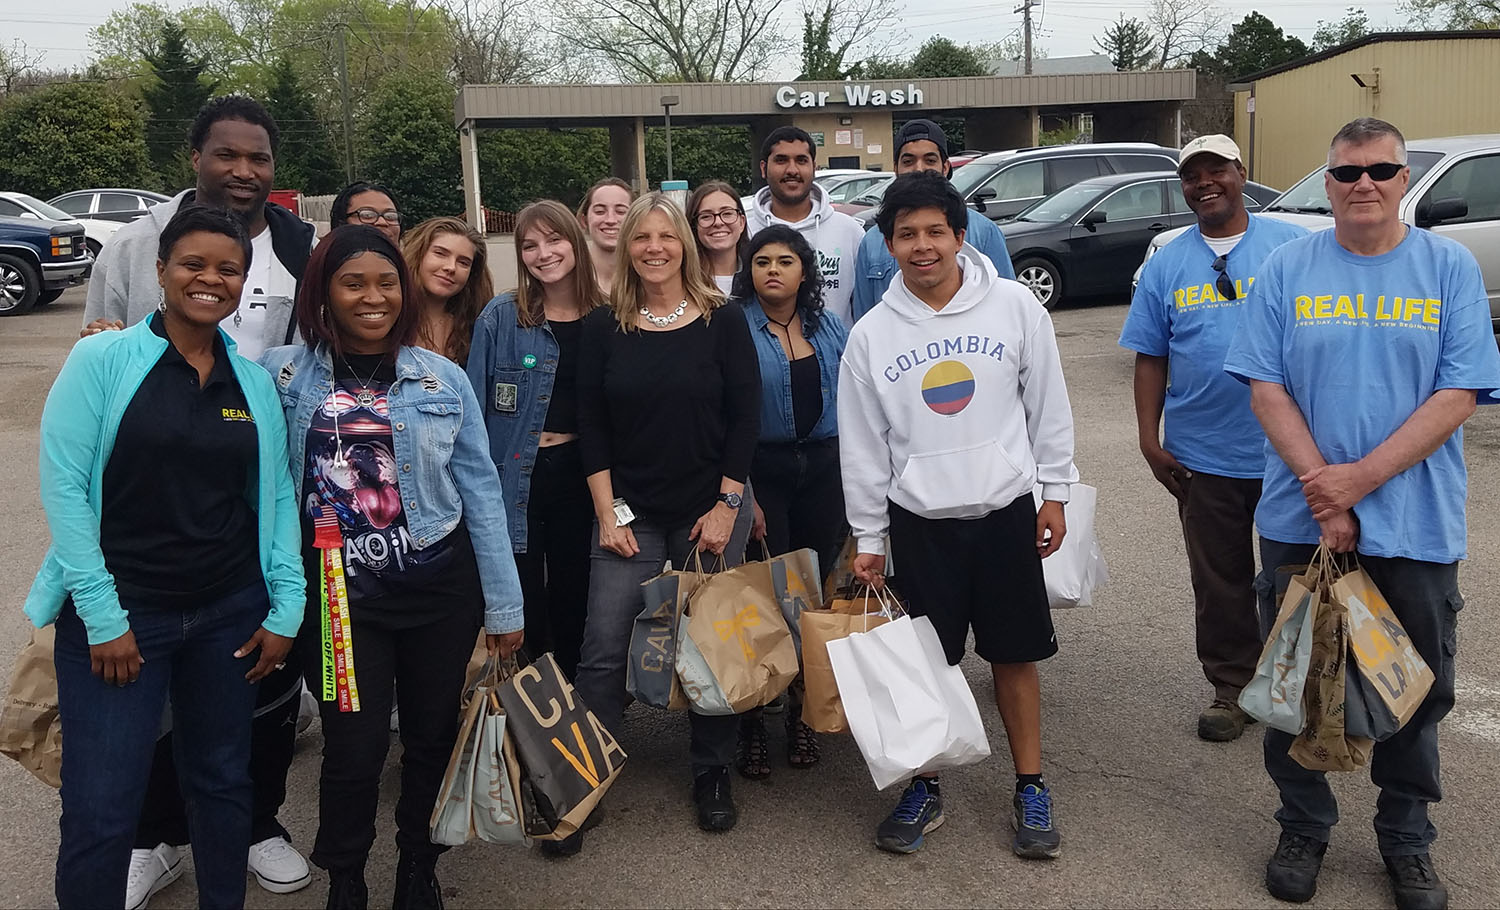 Students prepared “hope bags” containing toiletry items, footwear and contraceptives for victims of sex trafficking in partnership with Richmond-based volunteer organization REAL LIFE.